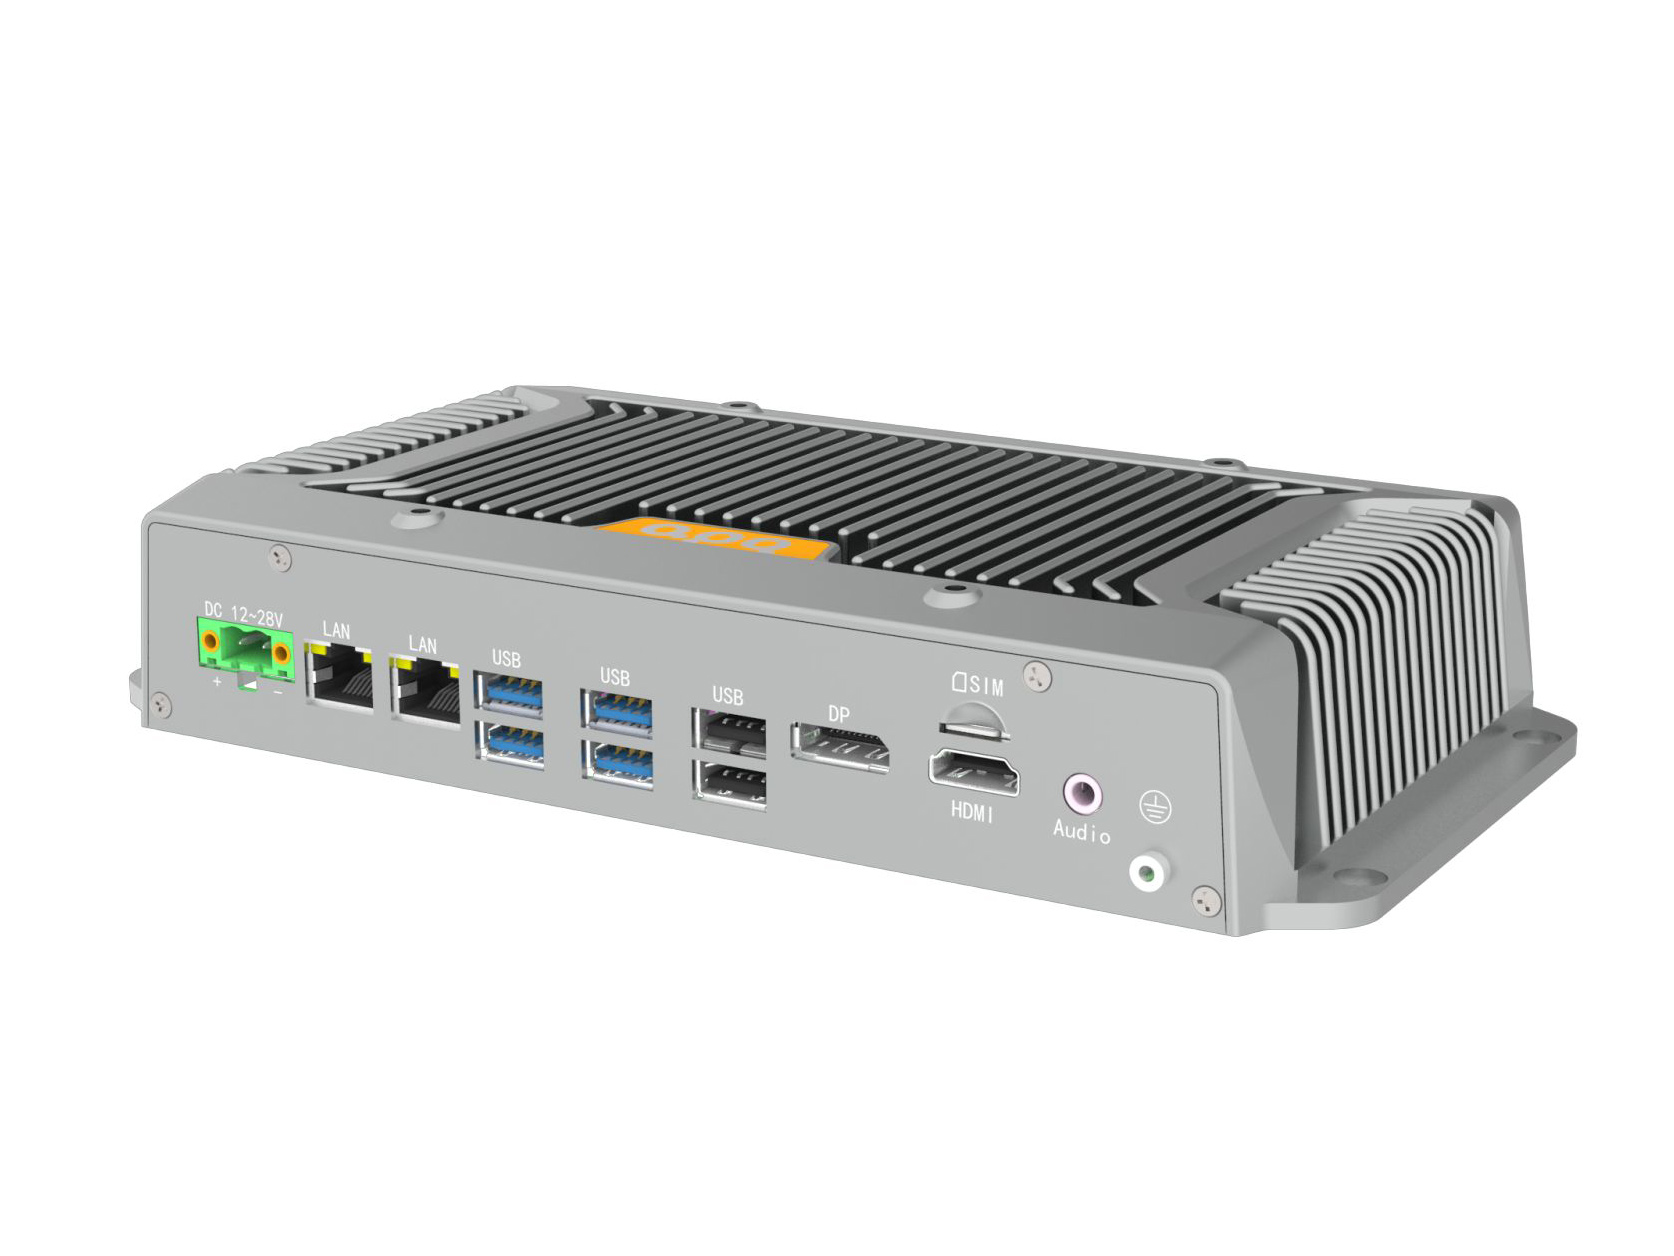 E5S Embedded Industrial PC